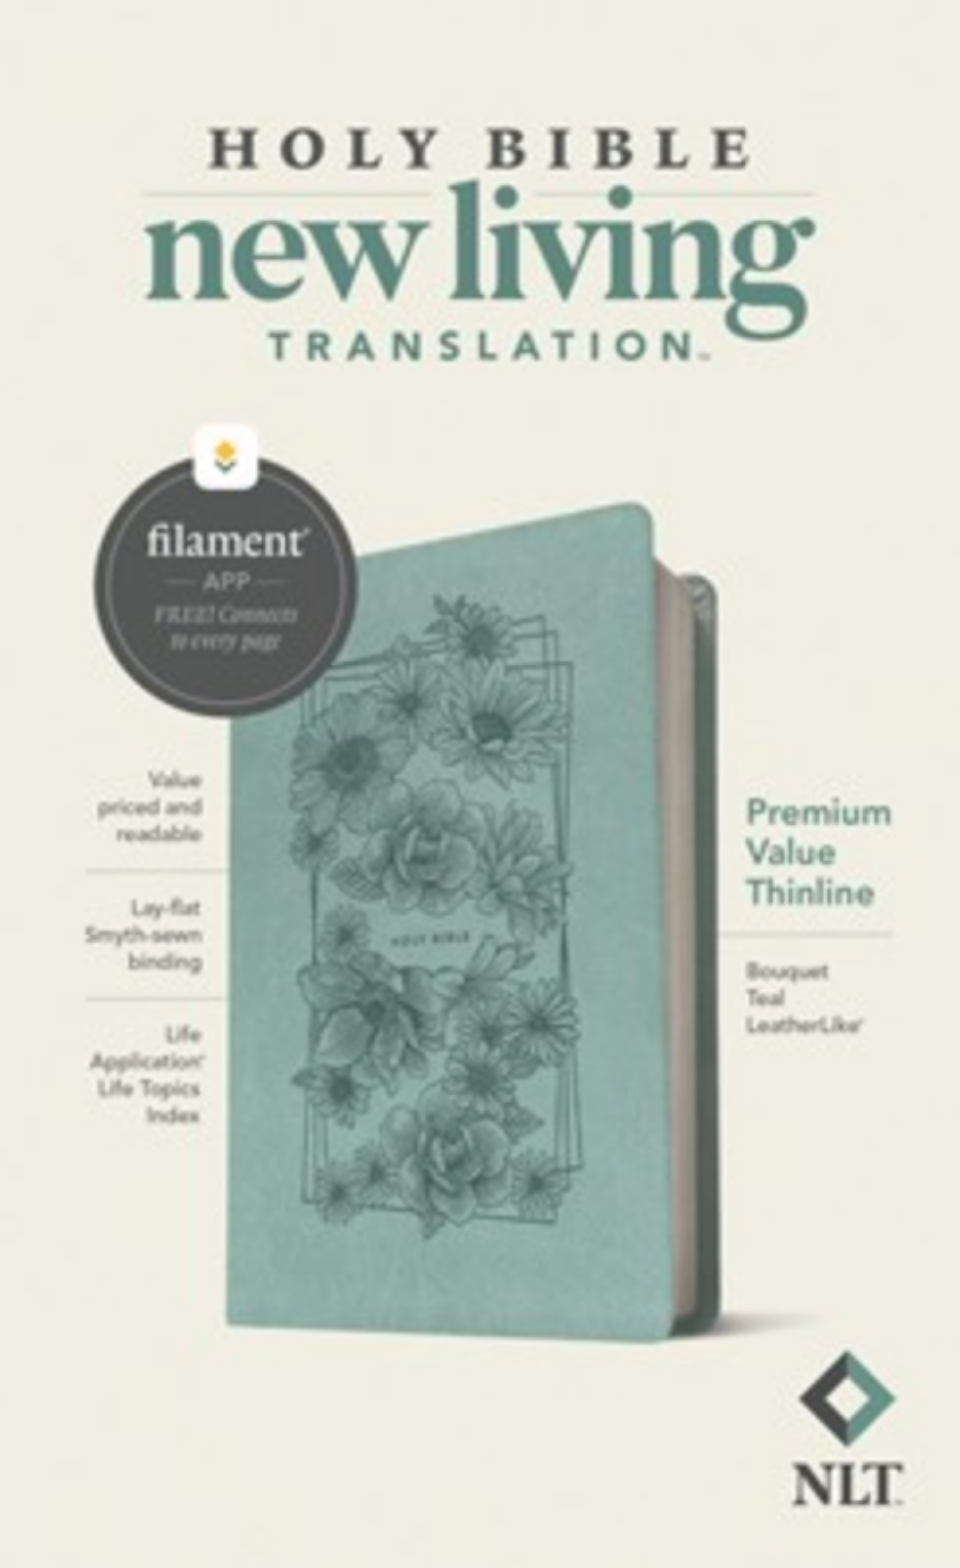 Wendy Shoults won a Filament Bible (NLT) by Tyndale (click to view this amazing Bible and app!)